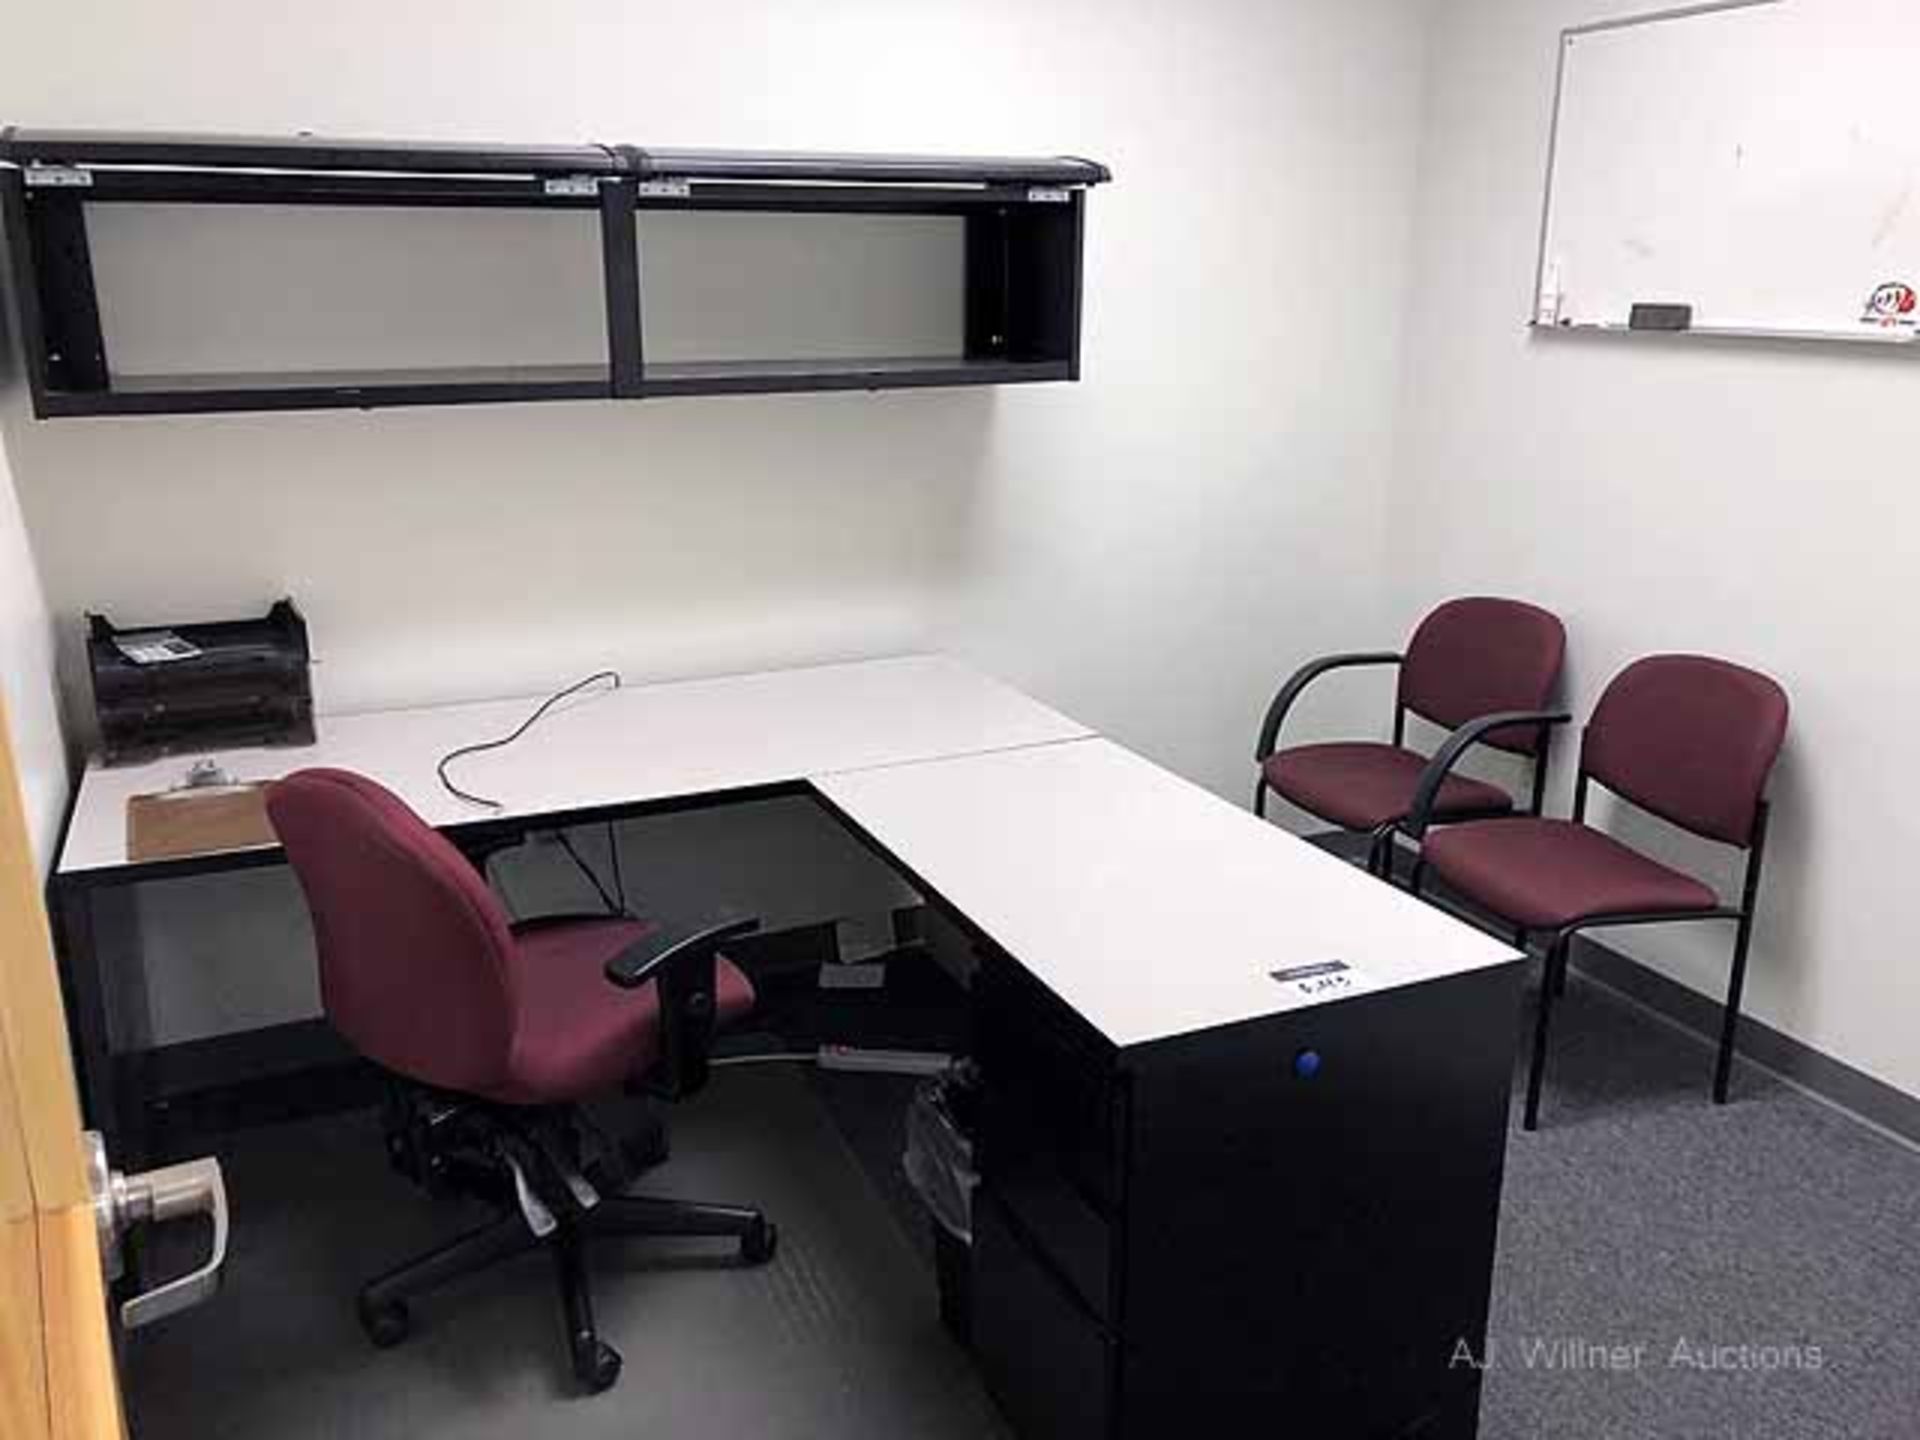 Kimble work station w/ 1 office chair and 2 reception chairs